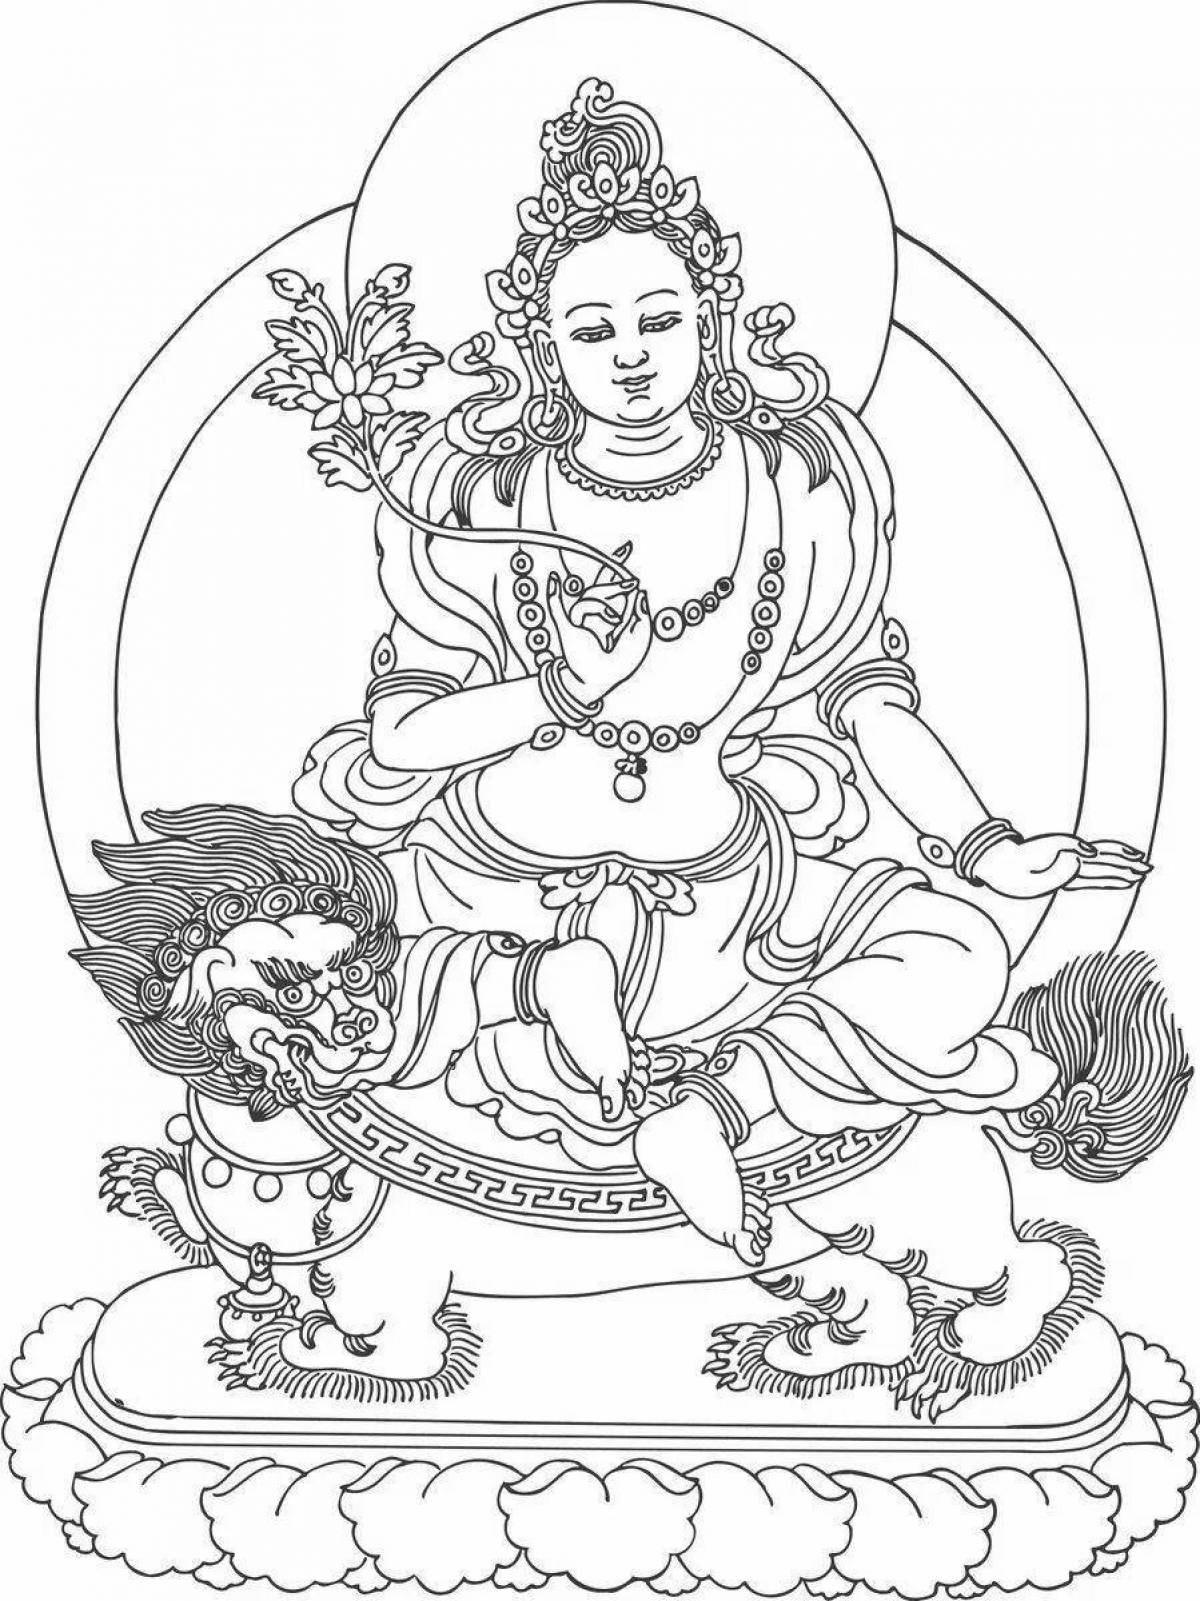 Glorious buddhism coloring book